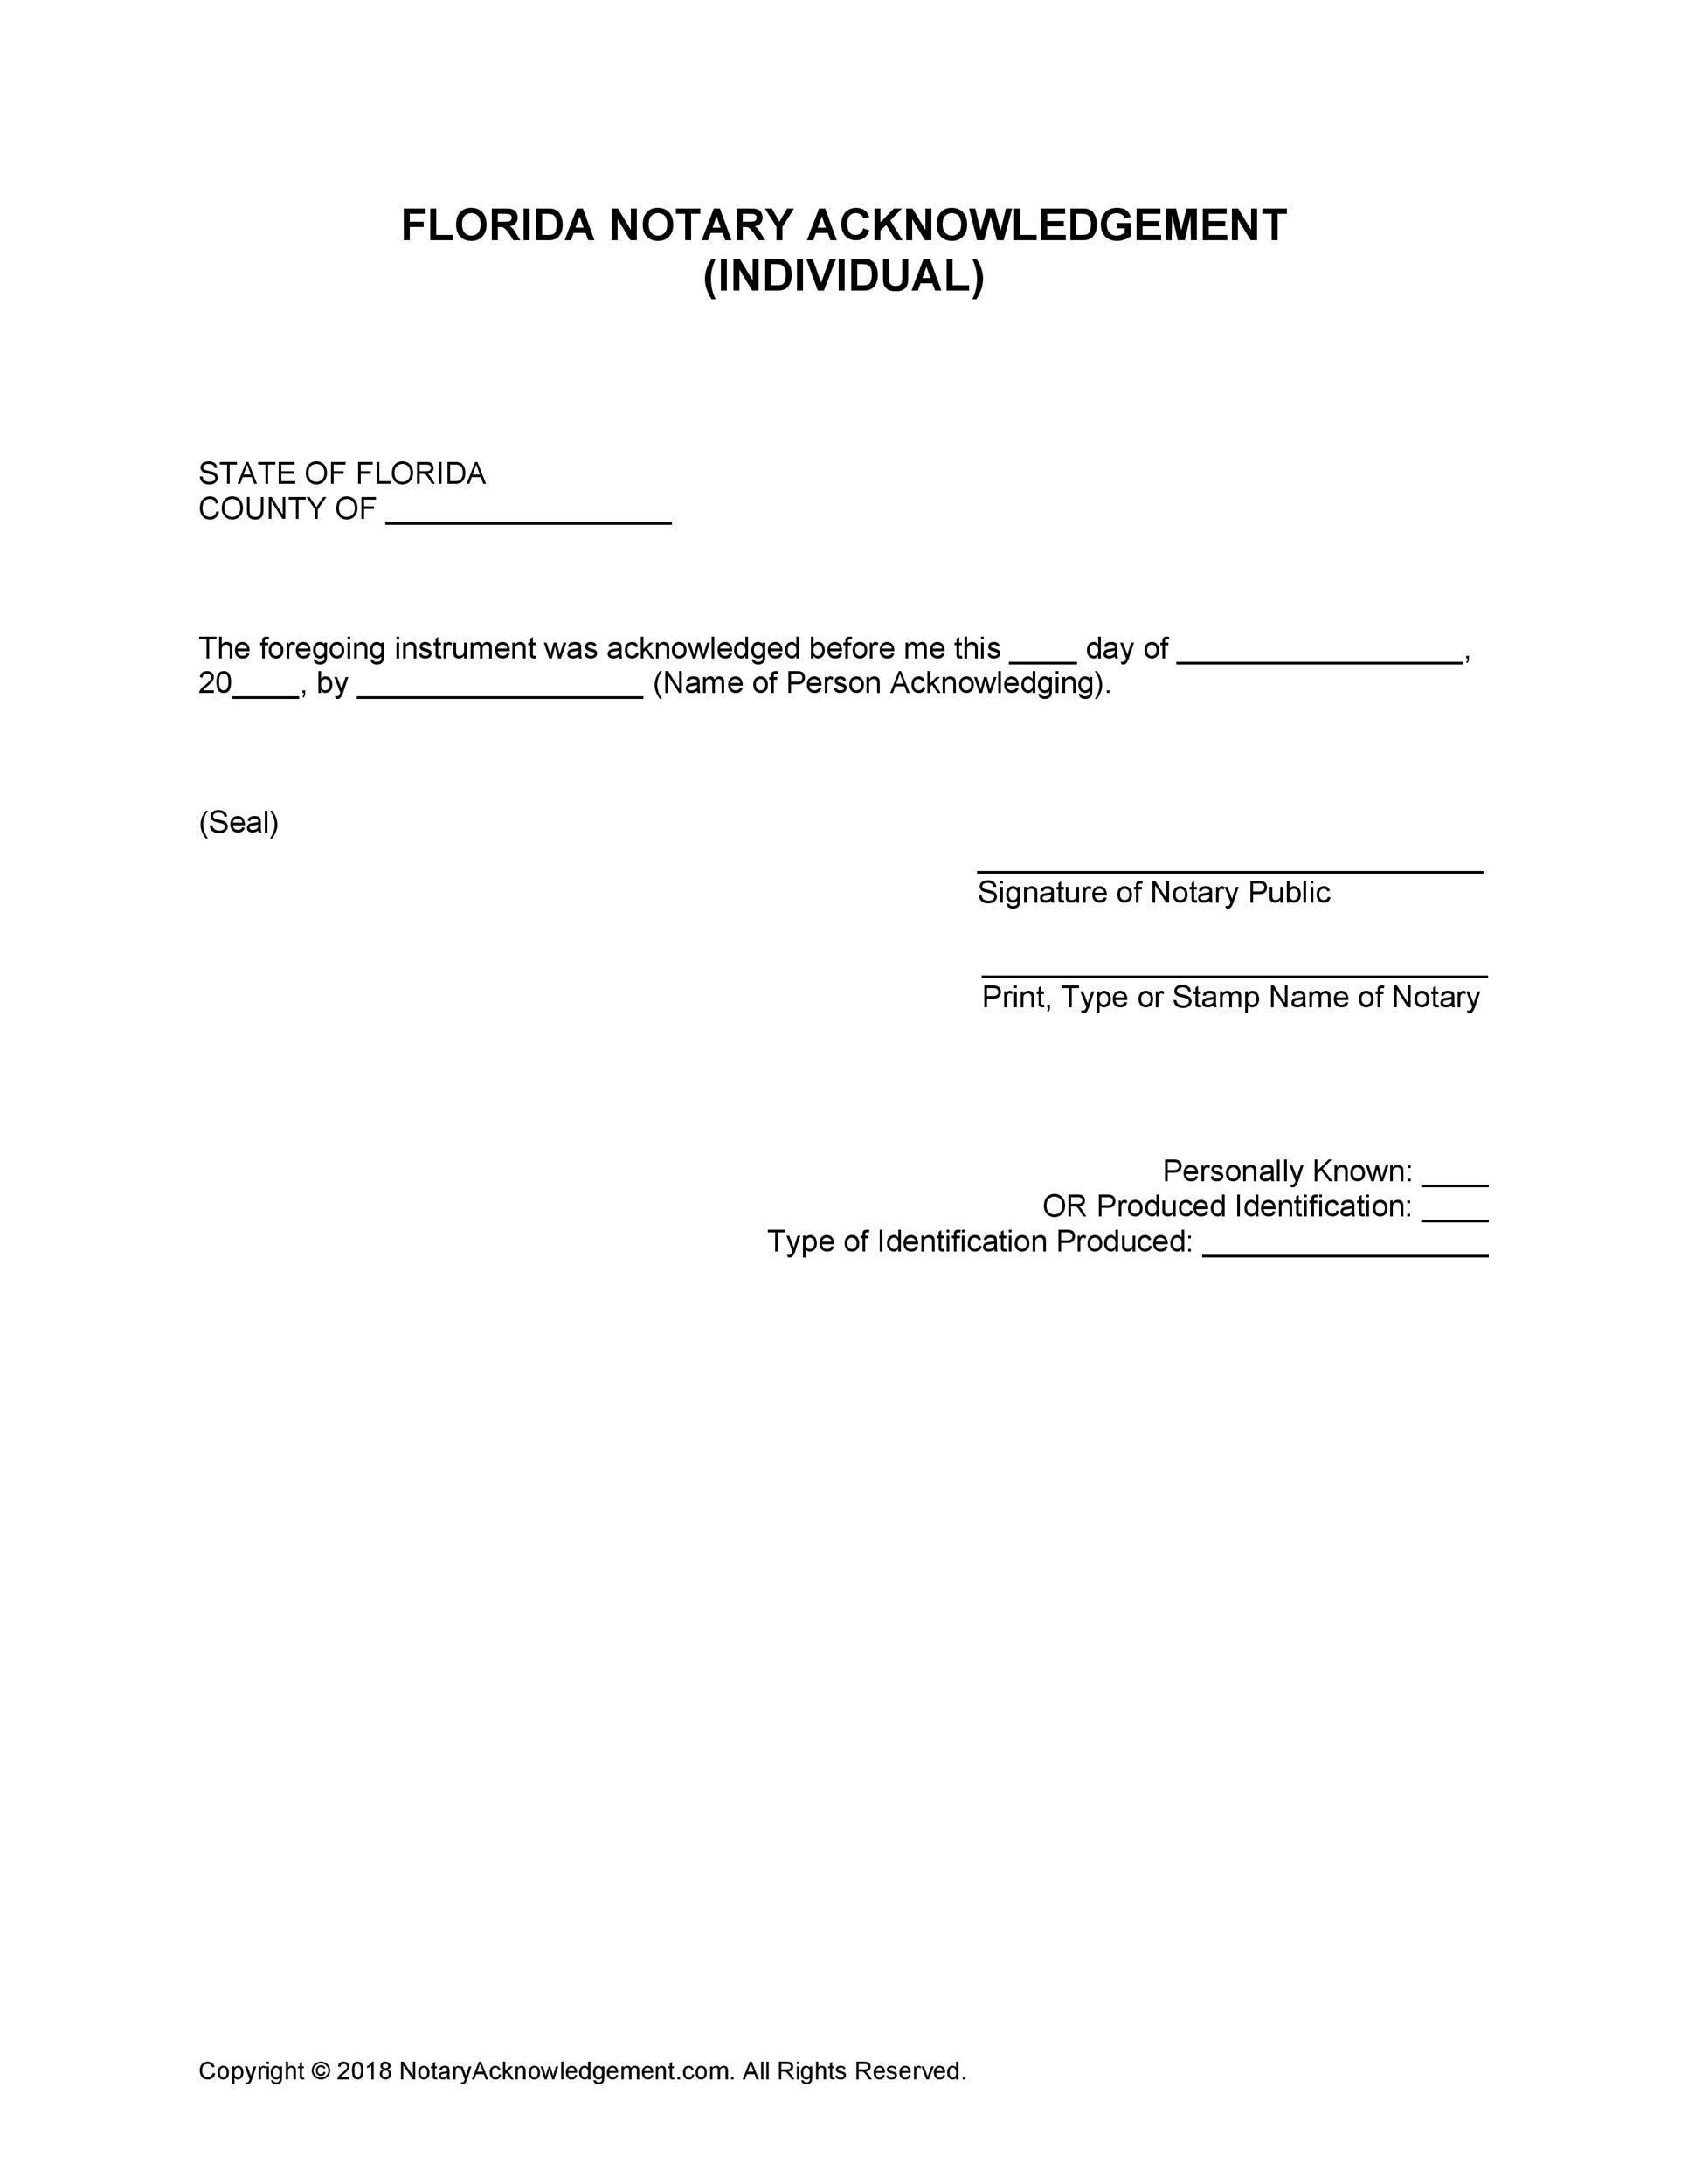 printable-notary-forms-tutore-org-master-of-documents